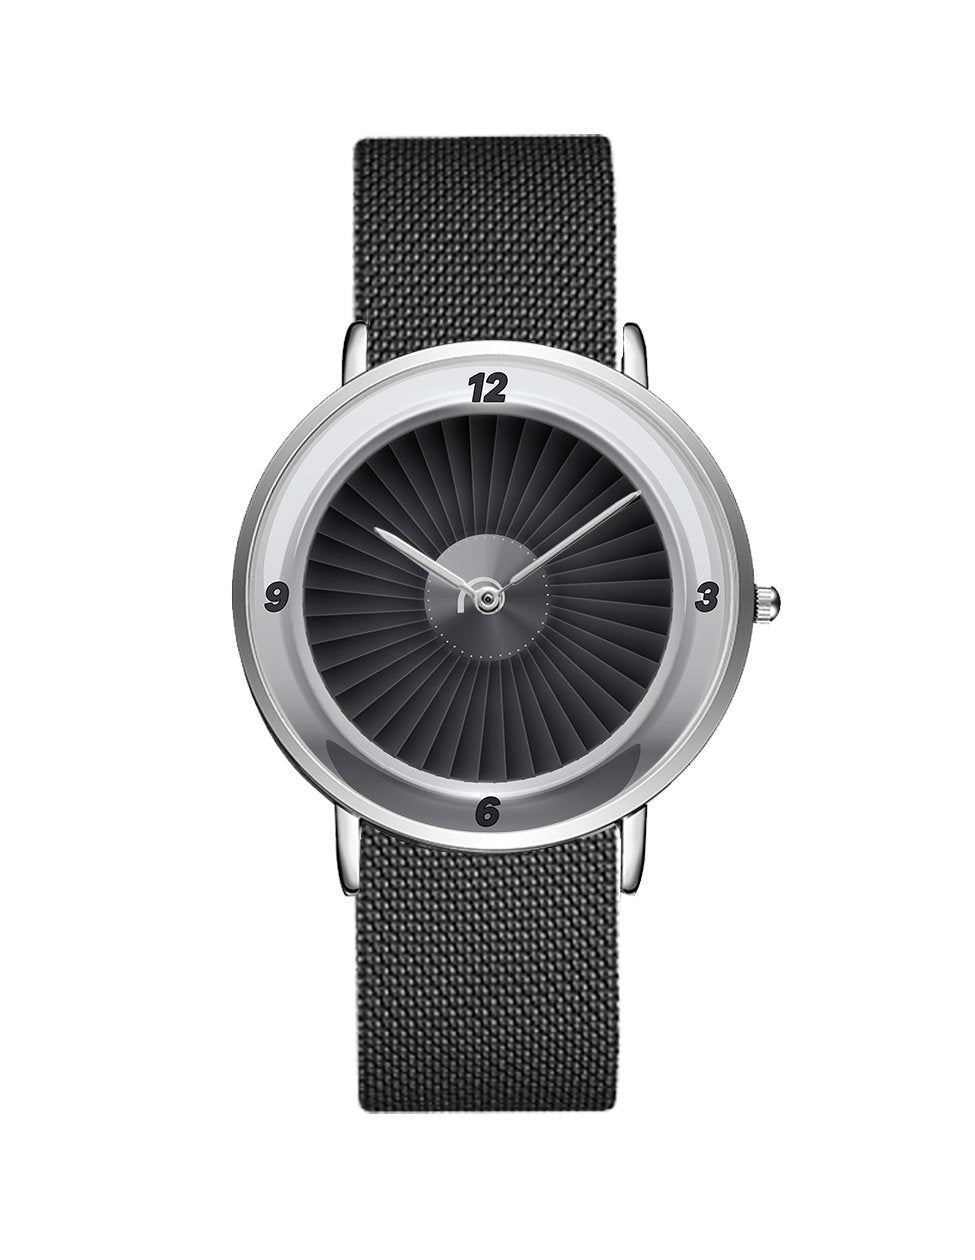 Jet Engine Designed Stainless Steel Strap Watches Pilot Eyes Store Silver & Black Stainless Steel Strap 